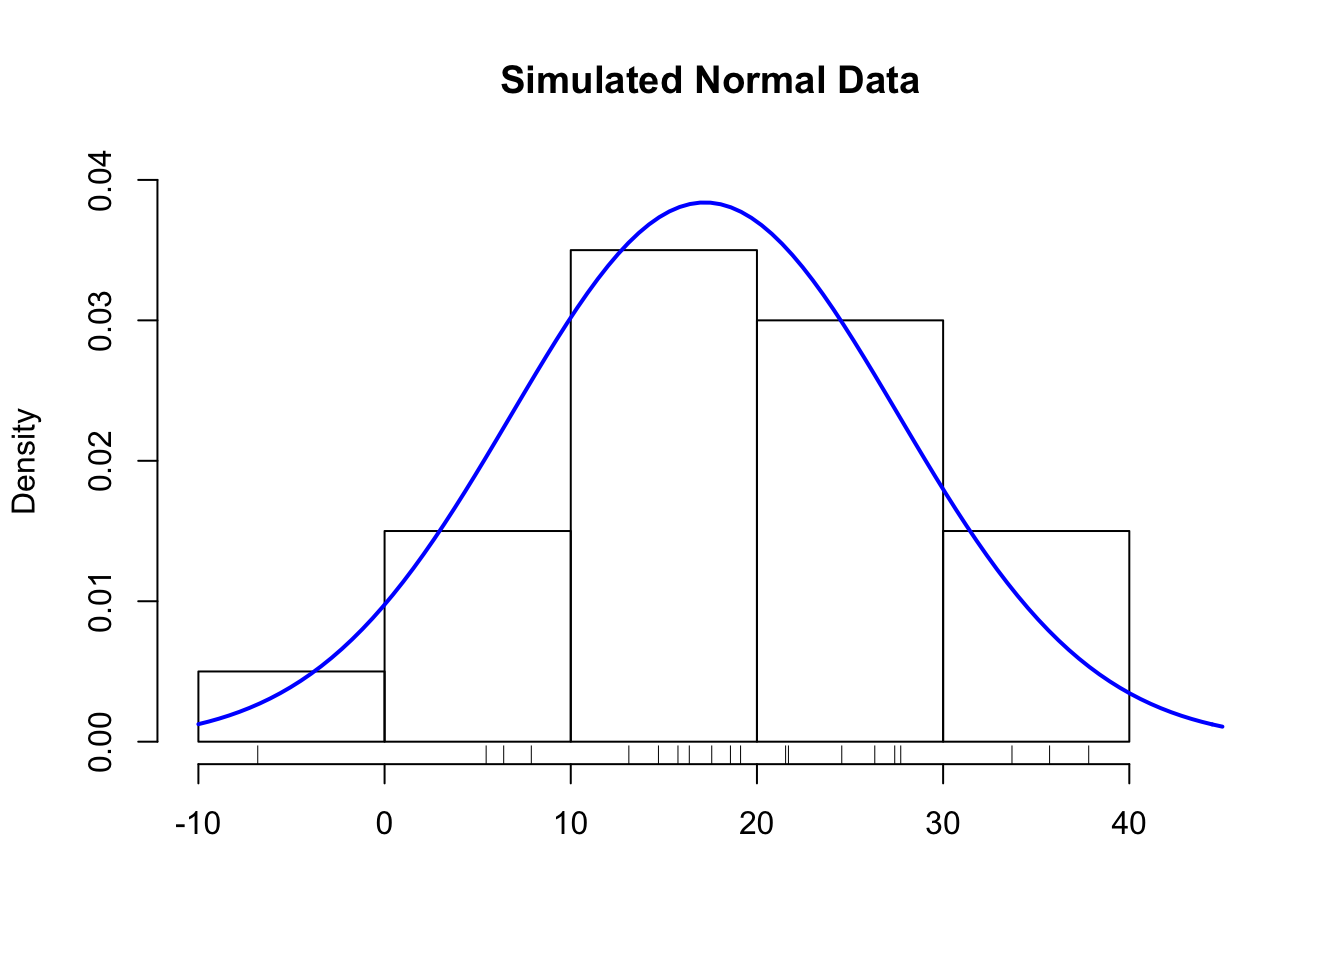 Histogram of Simulated Normal Data